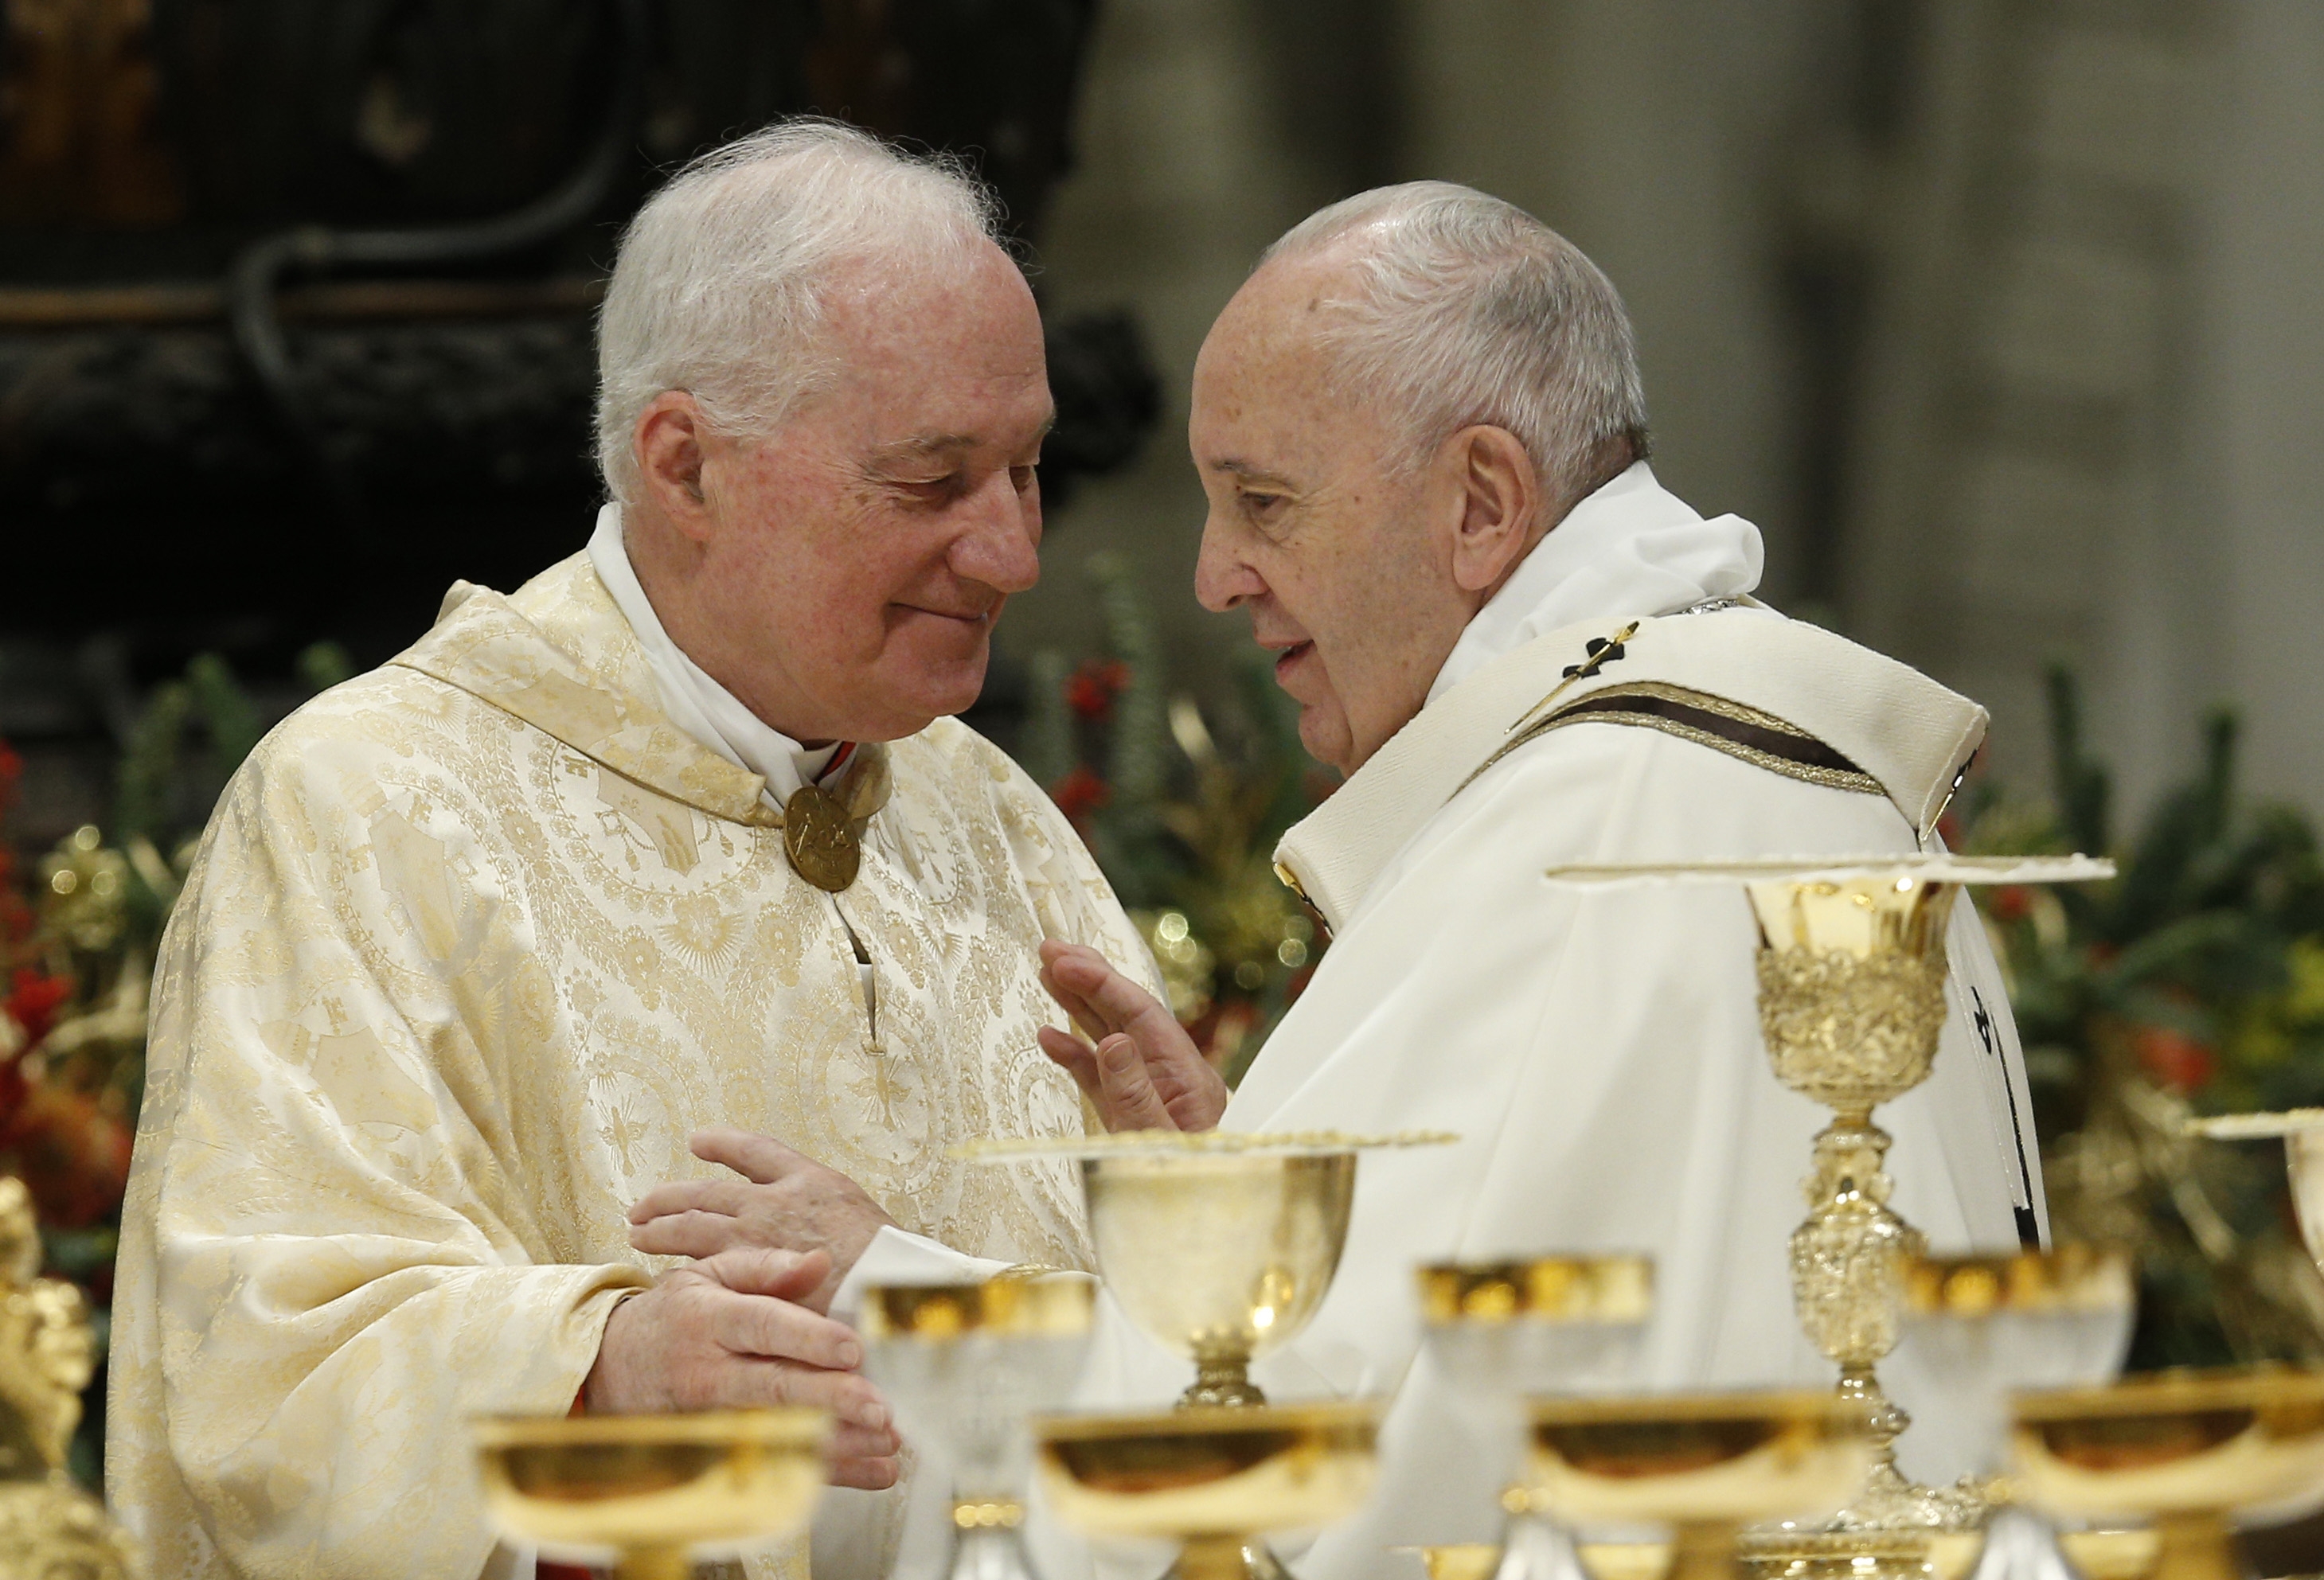 Pope Francis greets Cardinal Marc Ouellet, prefect of the Congregation for Bishops, during the sign of peace as he celebrates Mass marking the feast of the Epiphany in St. Peter's Basilica at the Vatican Jan. 6, 2020. (CNS photo/Paul Haring)